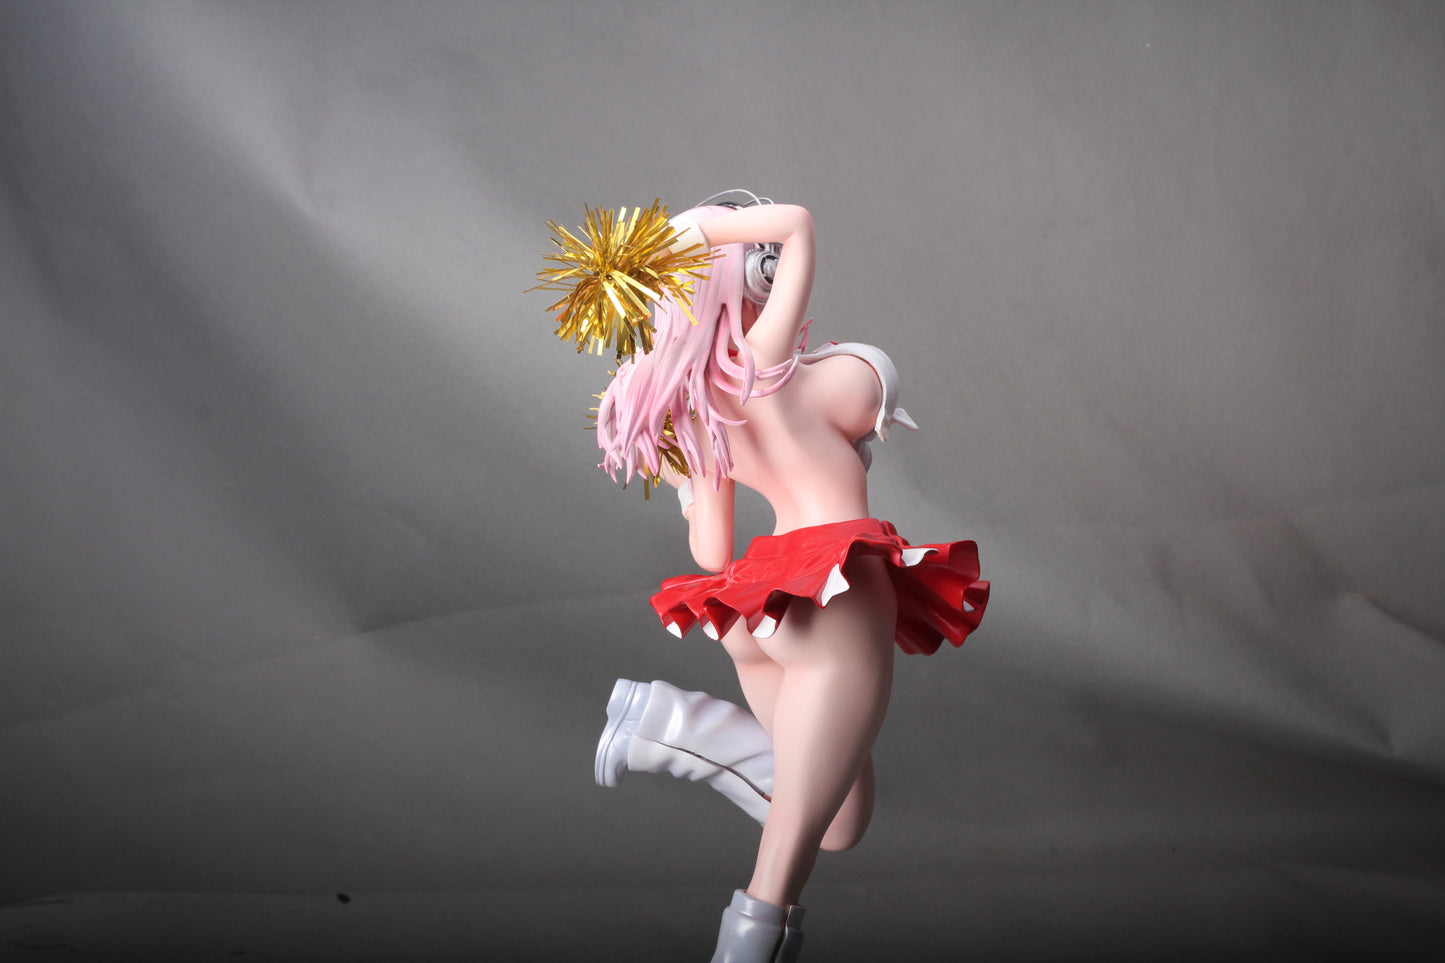 SoniComi (Super Sonico) - Sonico - 1/6 - Cheerleader ver. (Orchid Seed) naked anime figure sexy collectible action figures